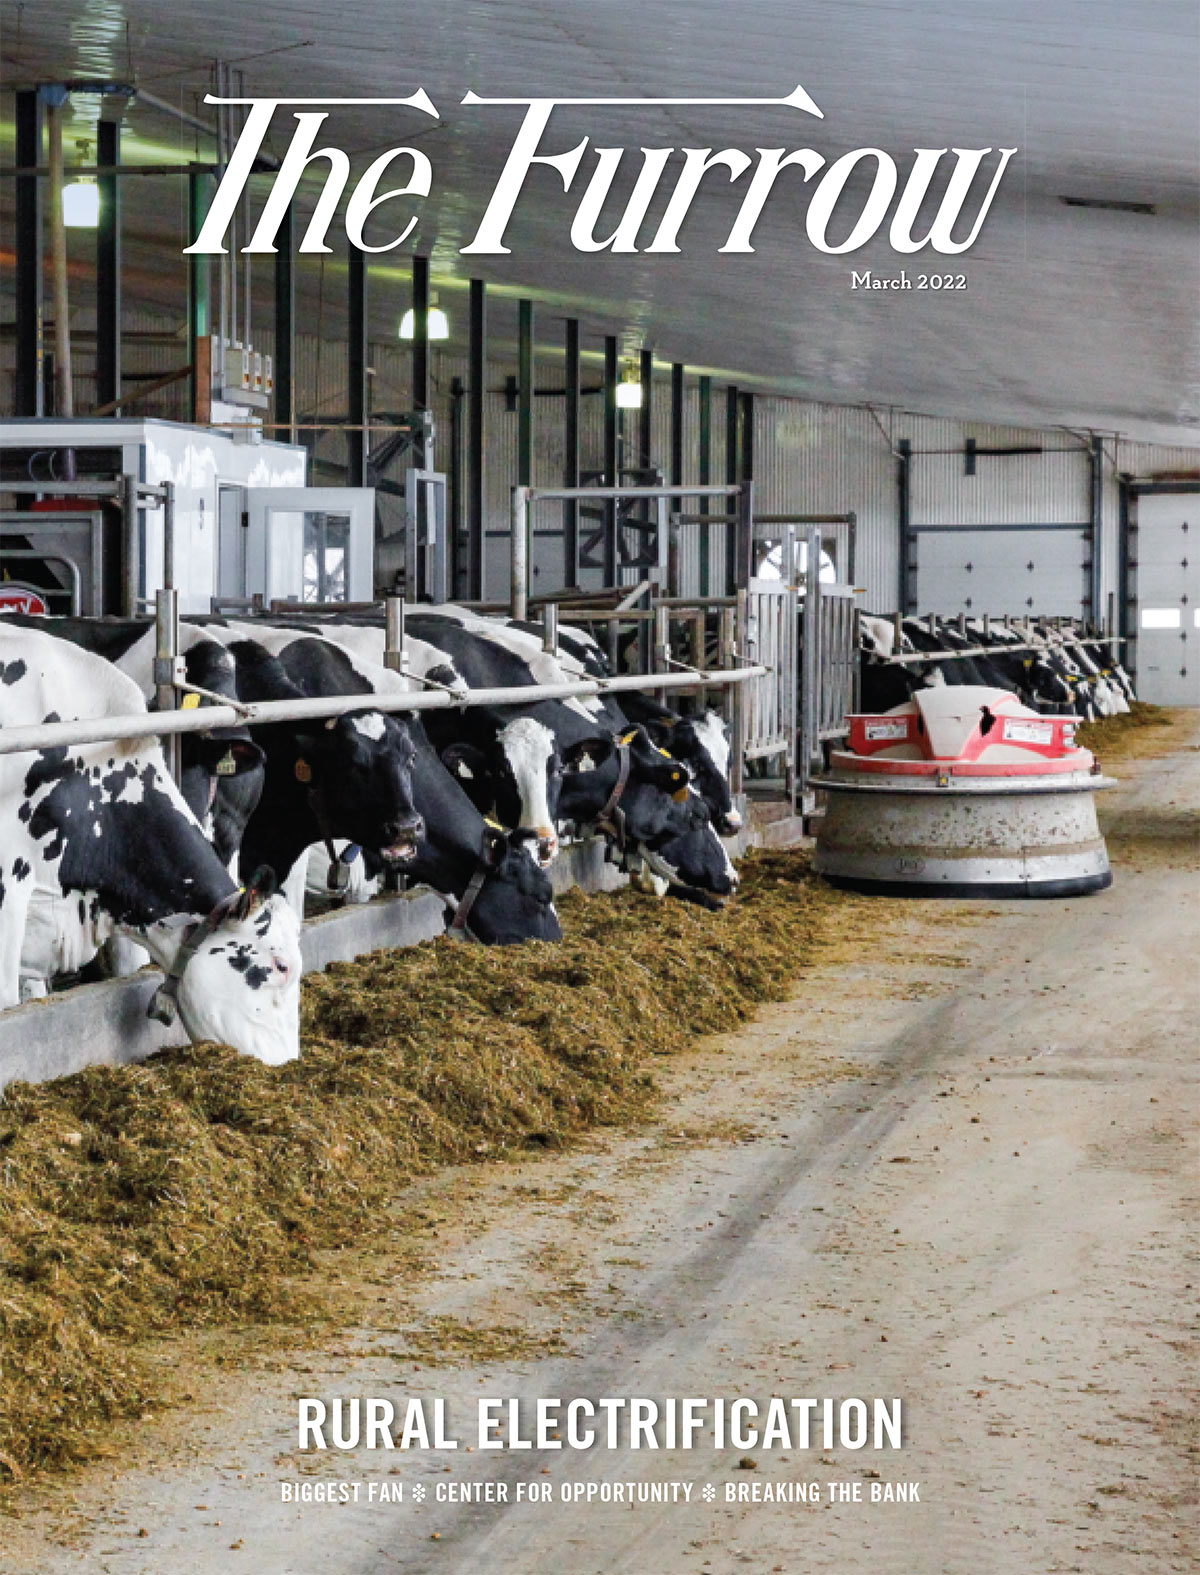 The Furrow - March 2022 Issue